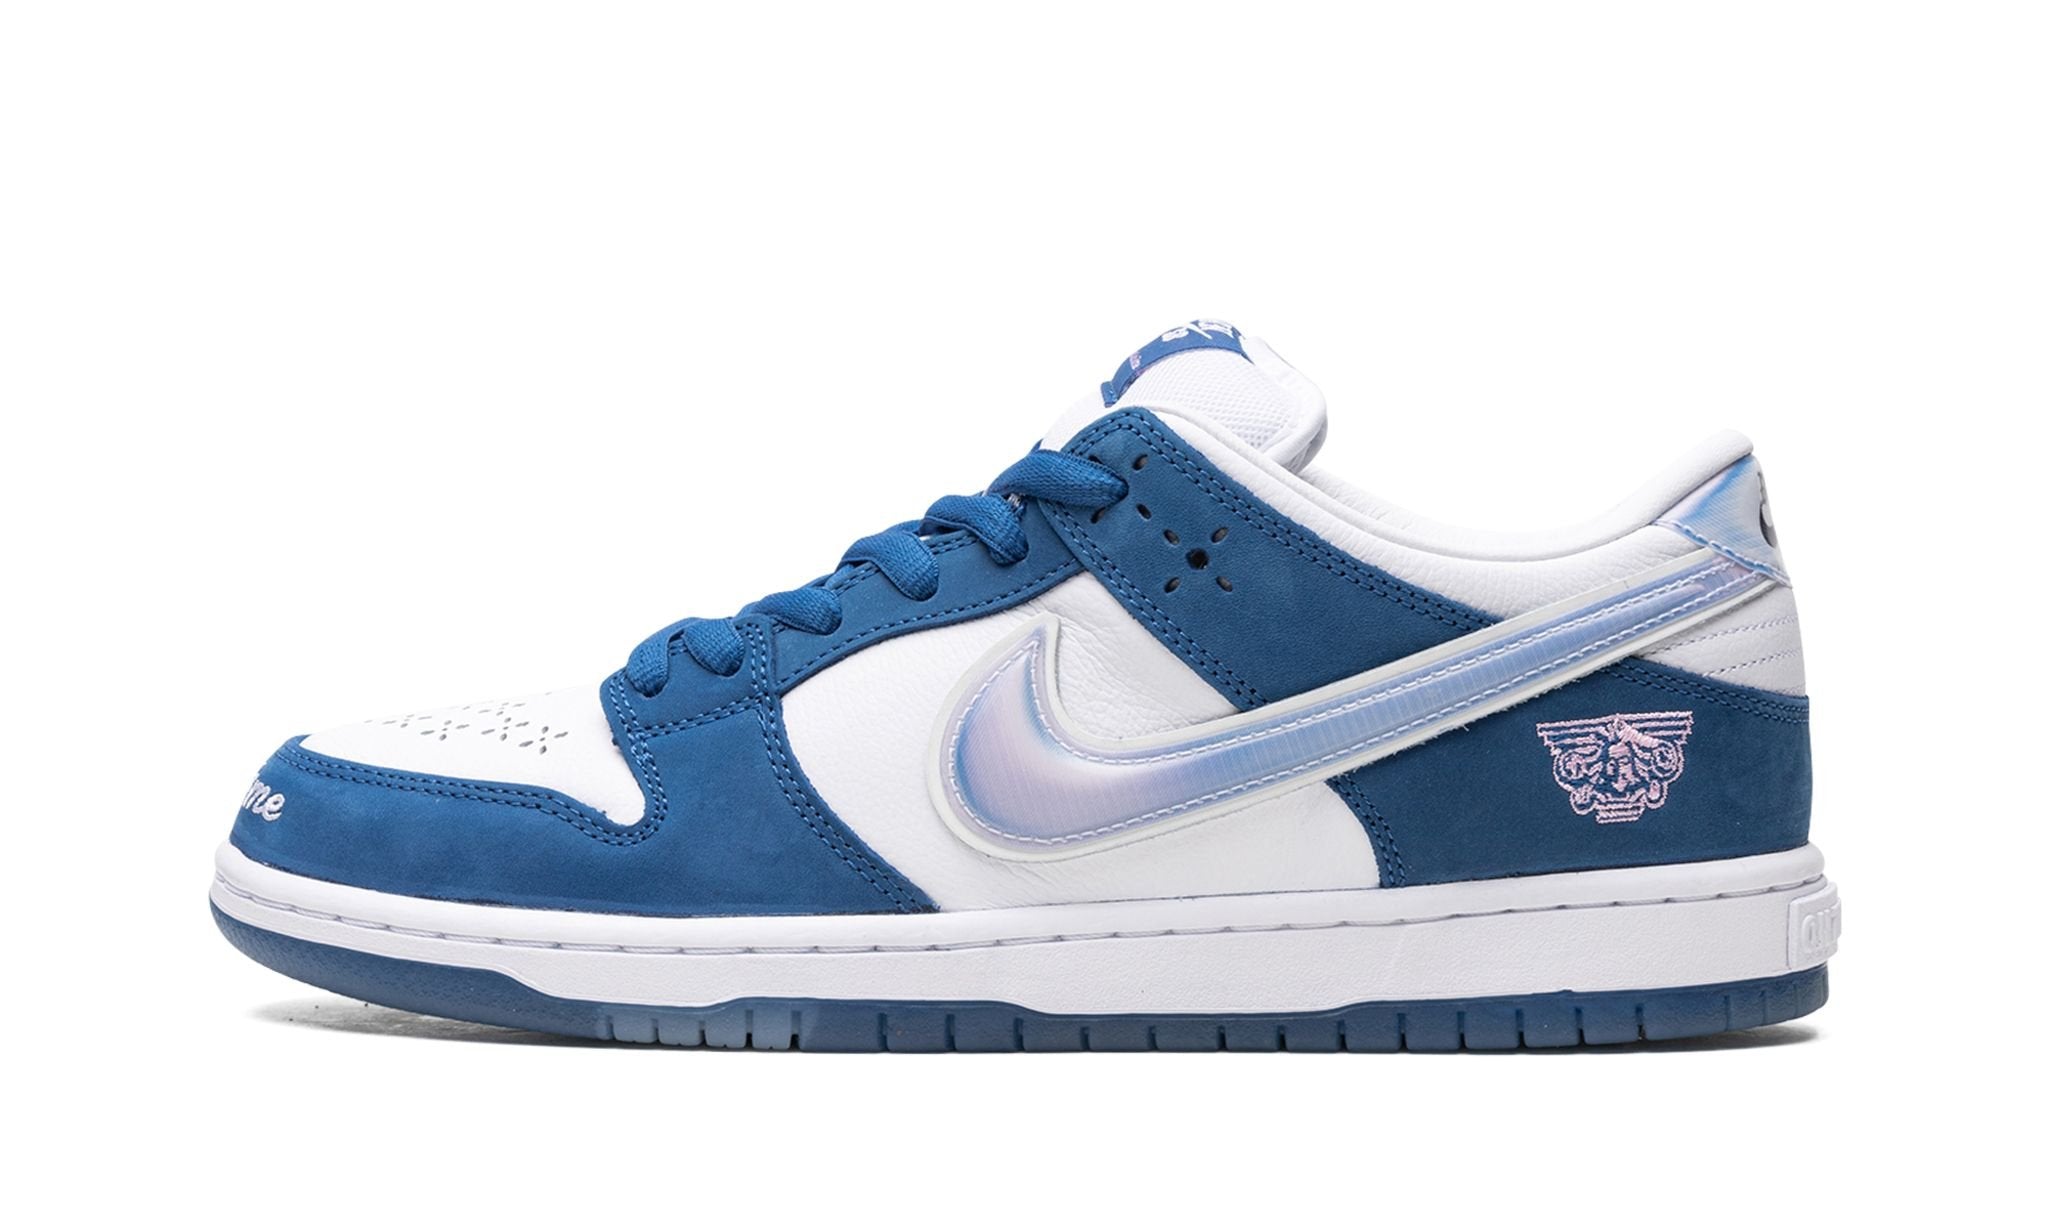 SB Dunk Low Born X Raised One Block At A Time